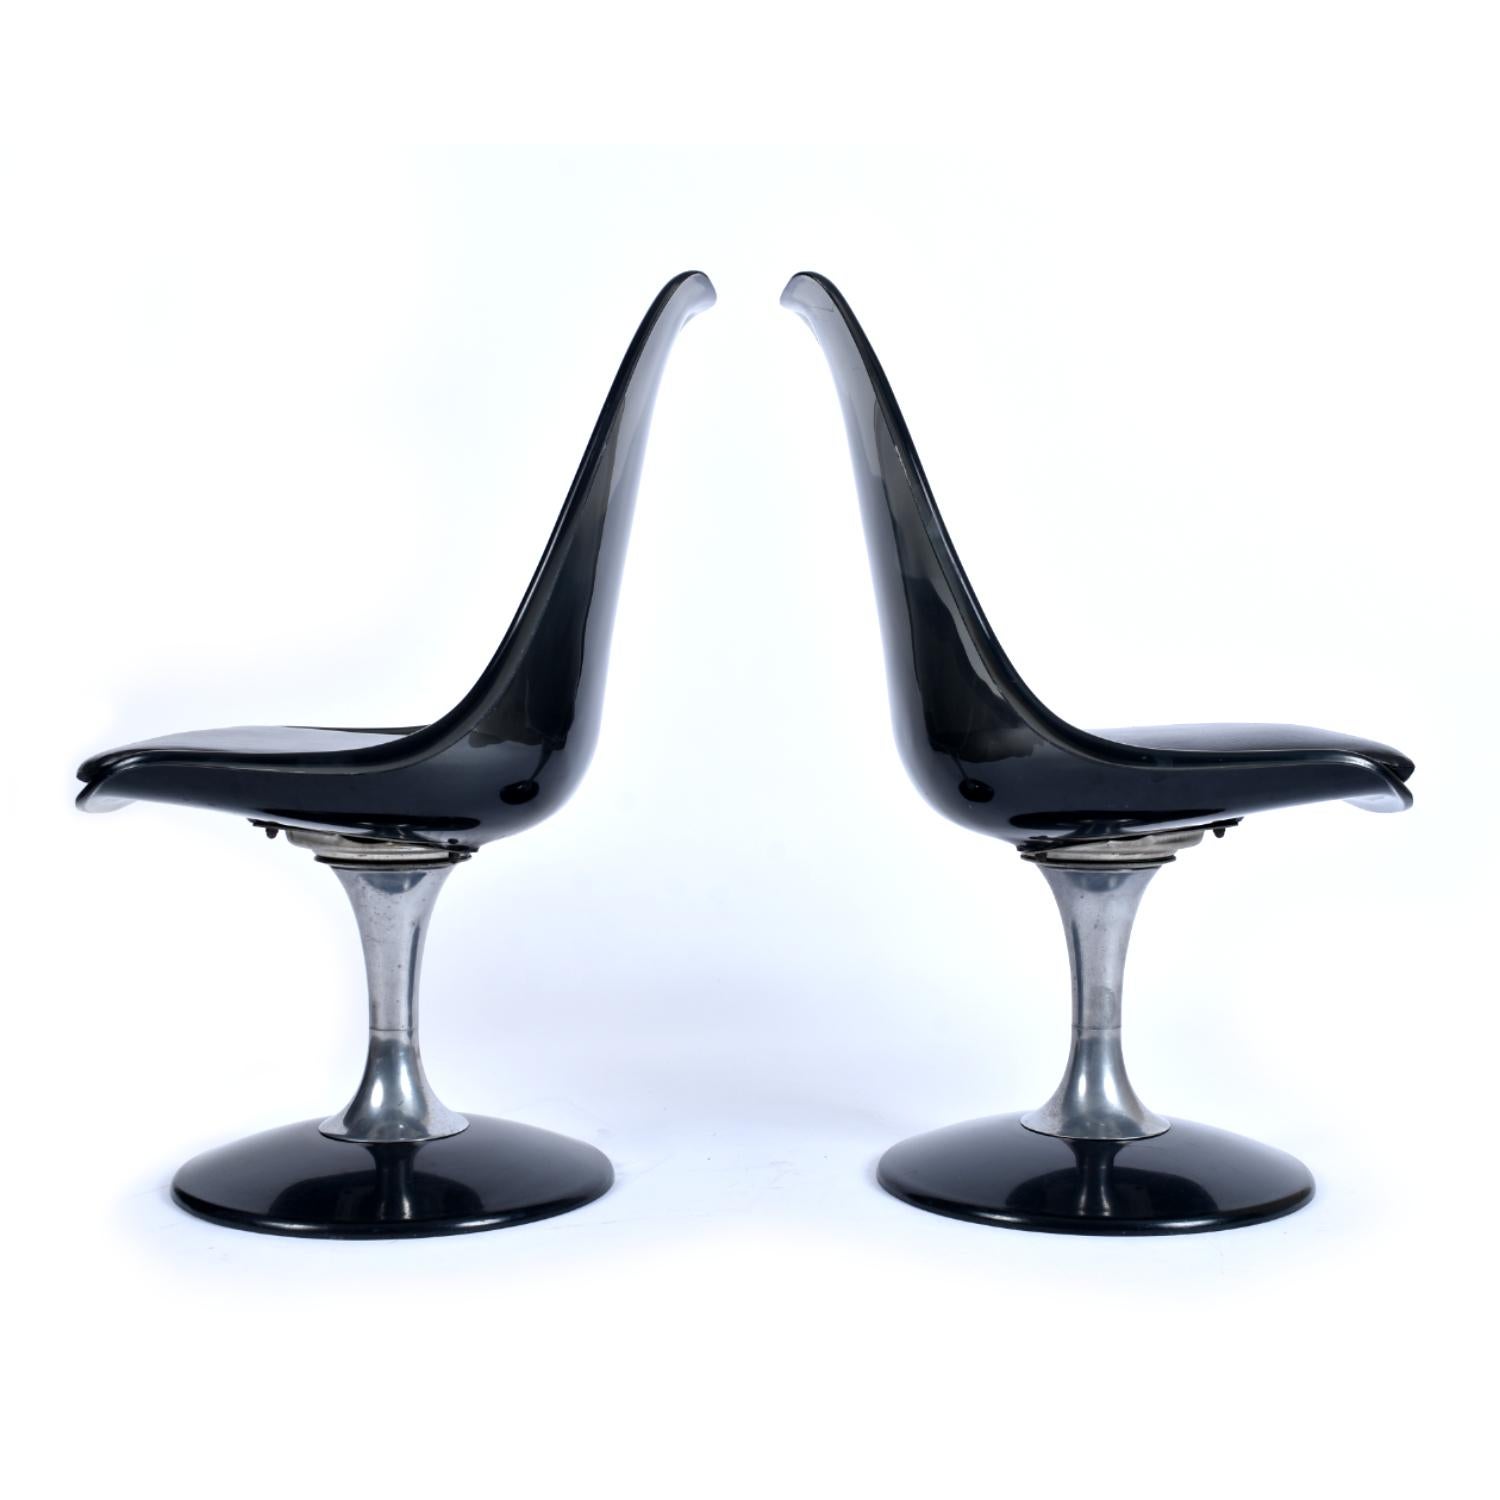 Stunning set of four smoked Lucite dining chairs by Chromcraft. The stylish chairs are formed from molded translucent black acrylic and mounted on an aluminum pedestal. The stem like pedestal terminates at a wide base, eliminating the cacophony of